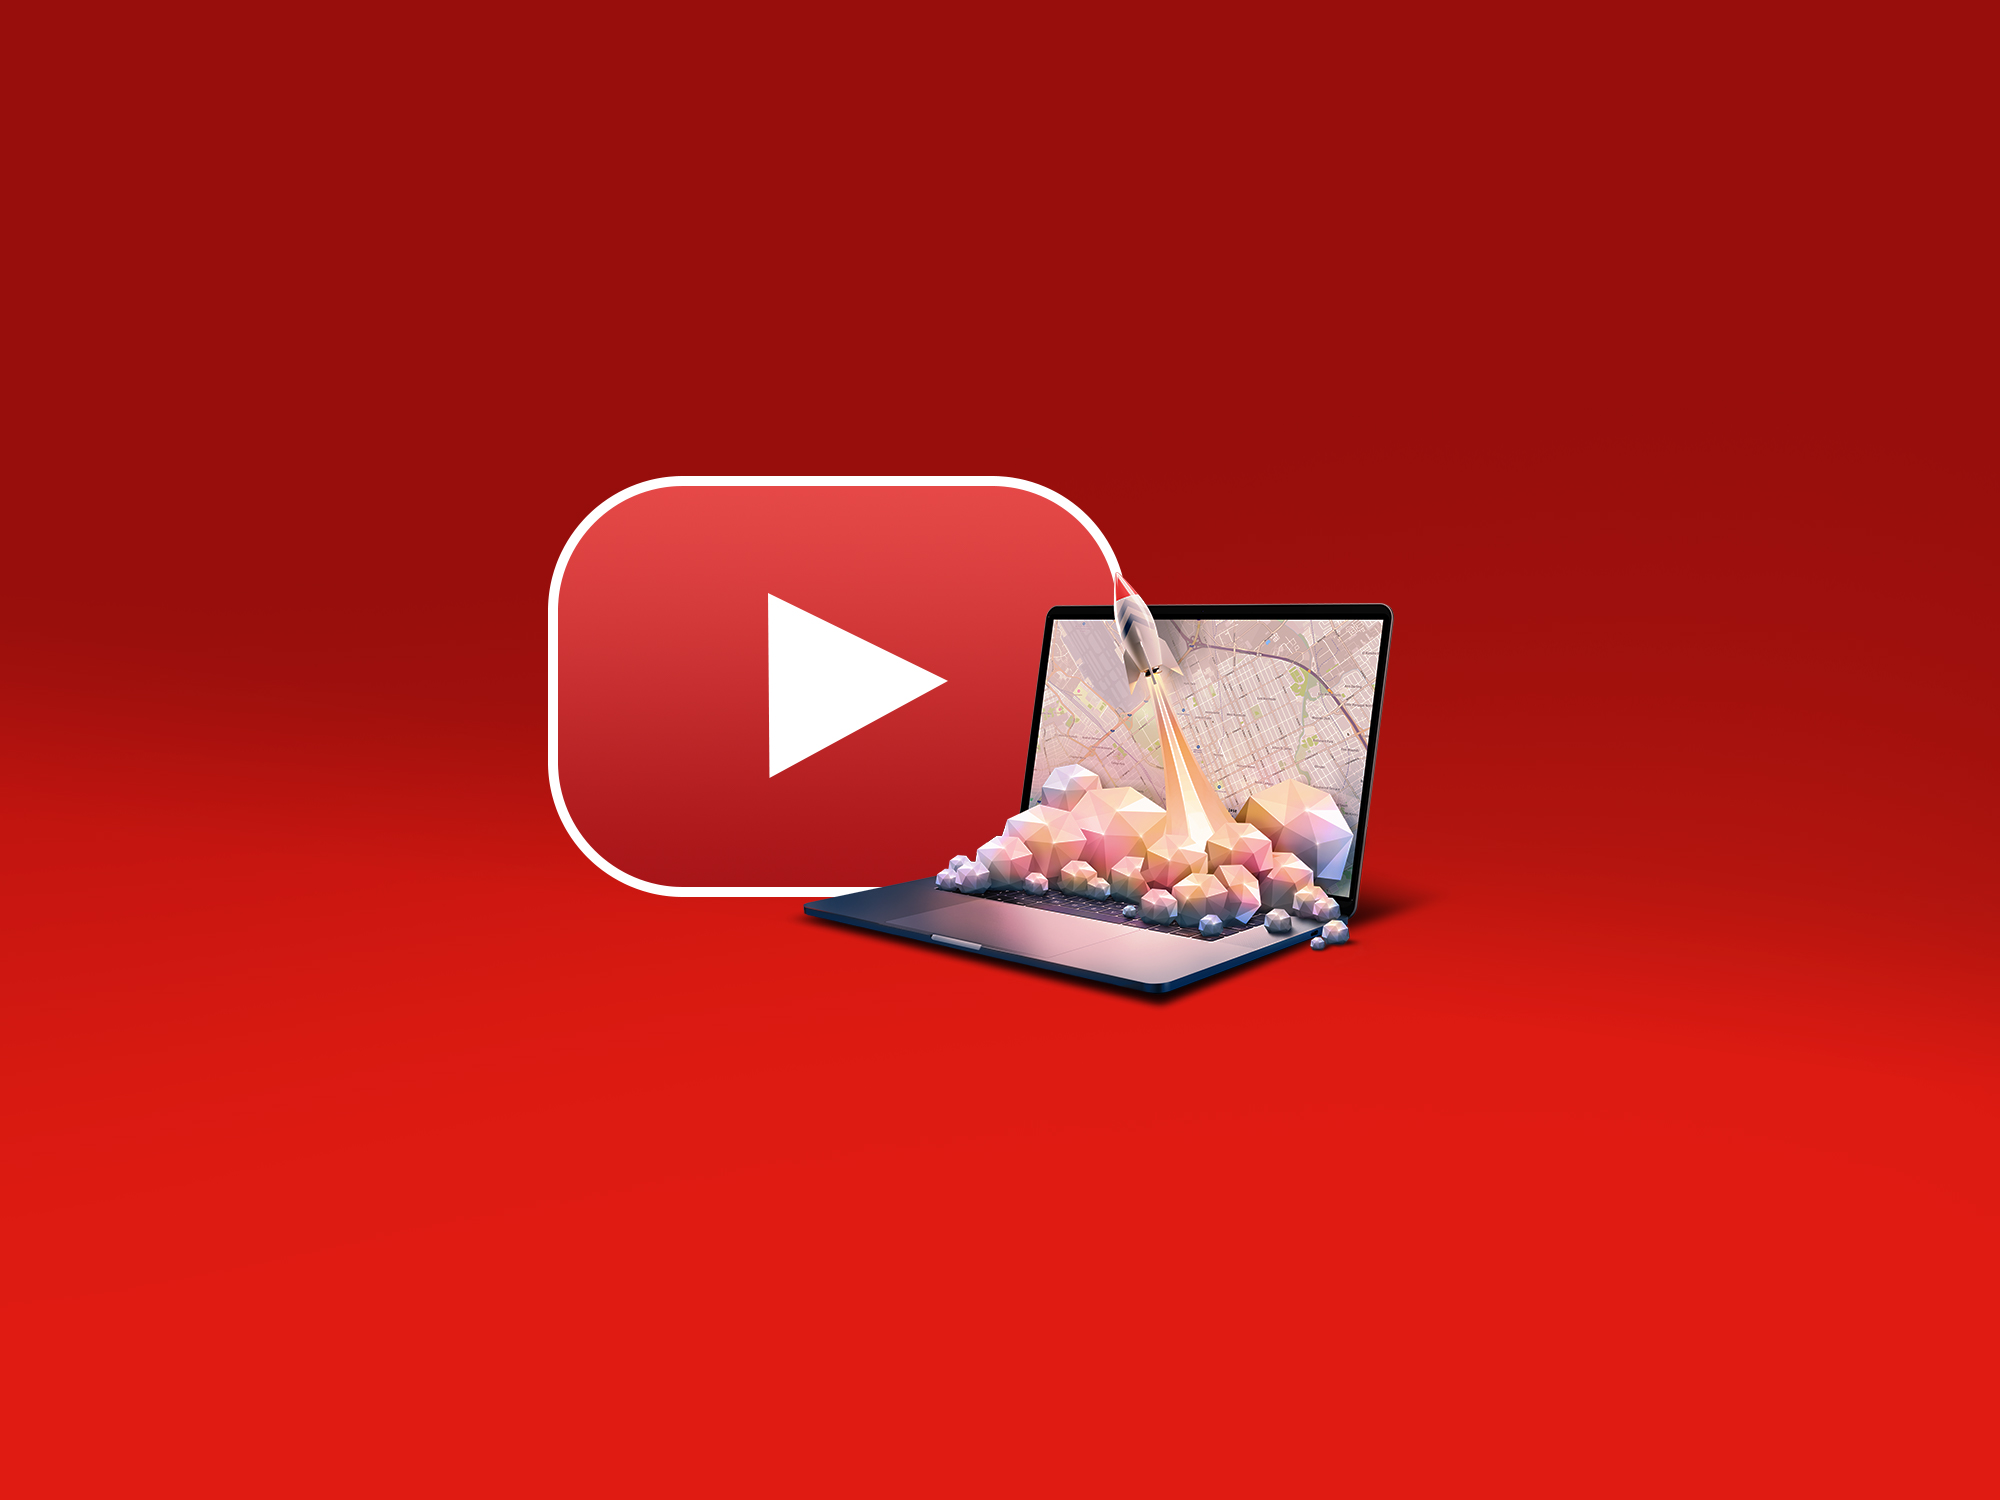 Laptop displaying TomTom rocket with red background and YouTube logo